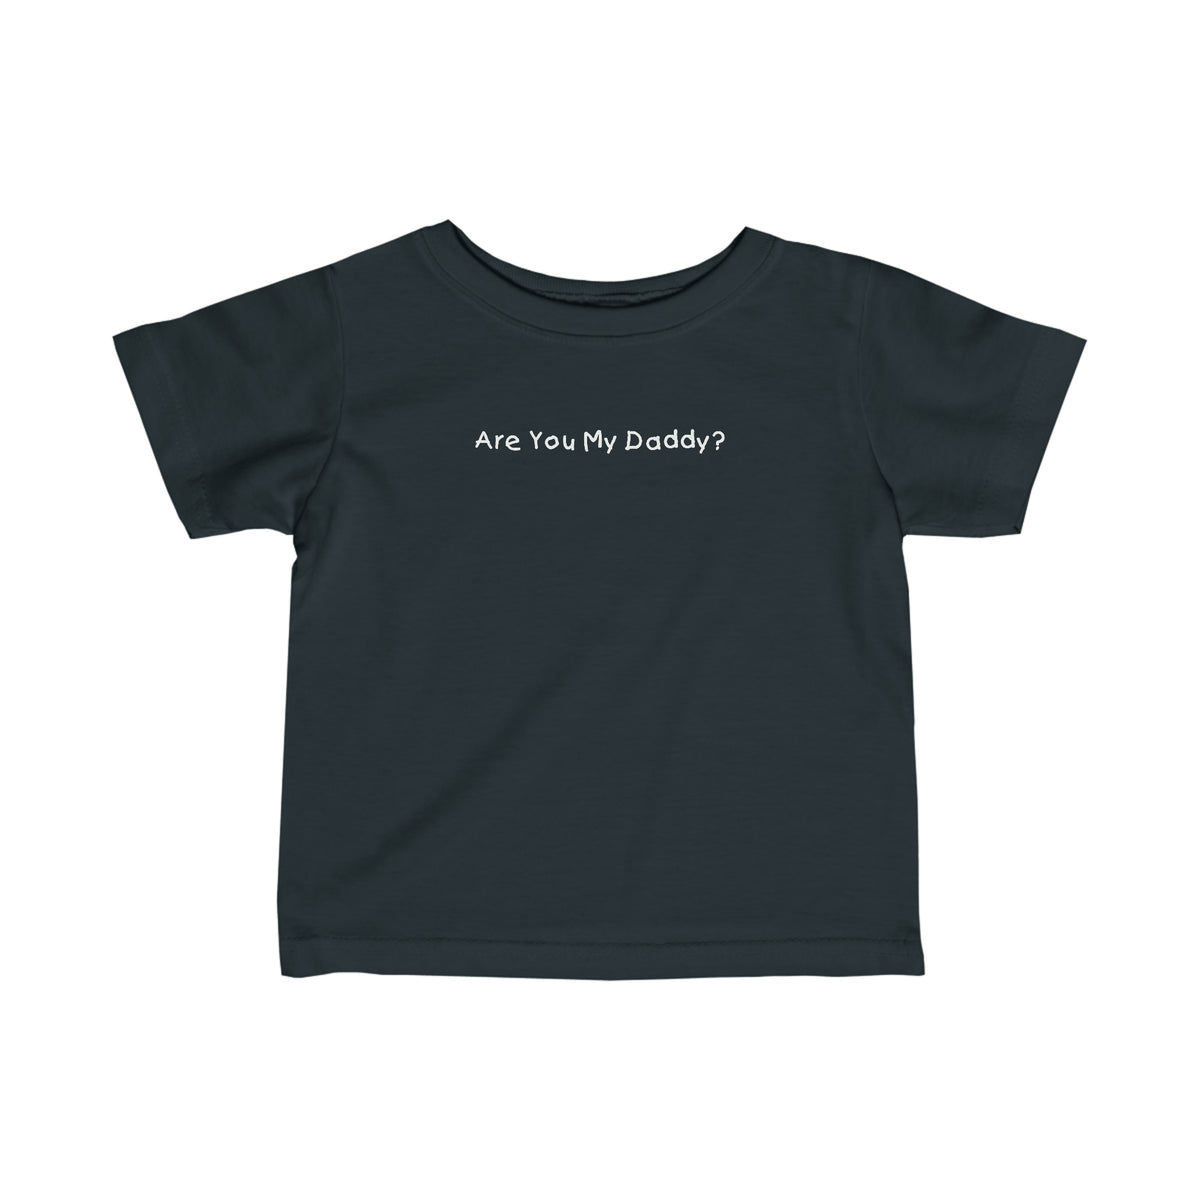 Are You My Daddy? - Baby T-Shirt